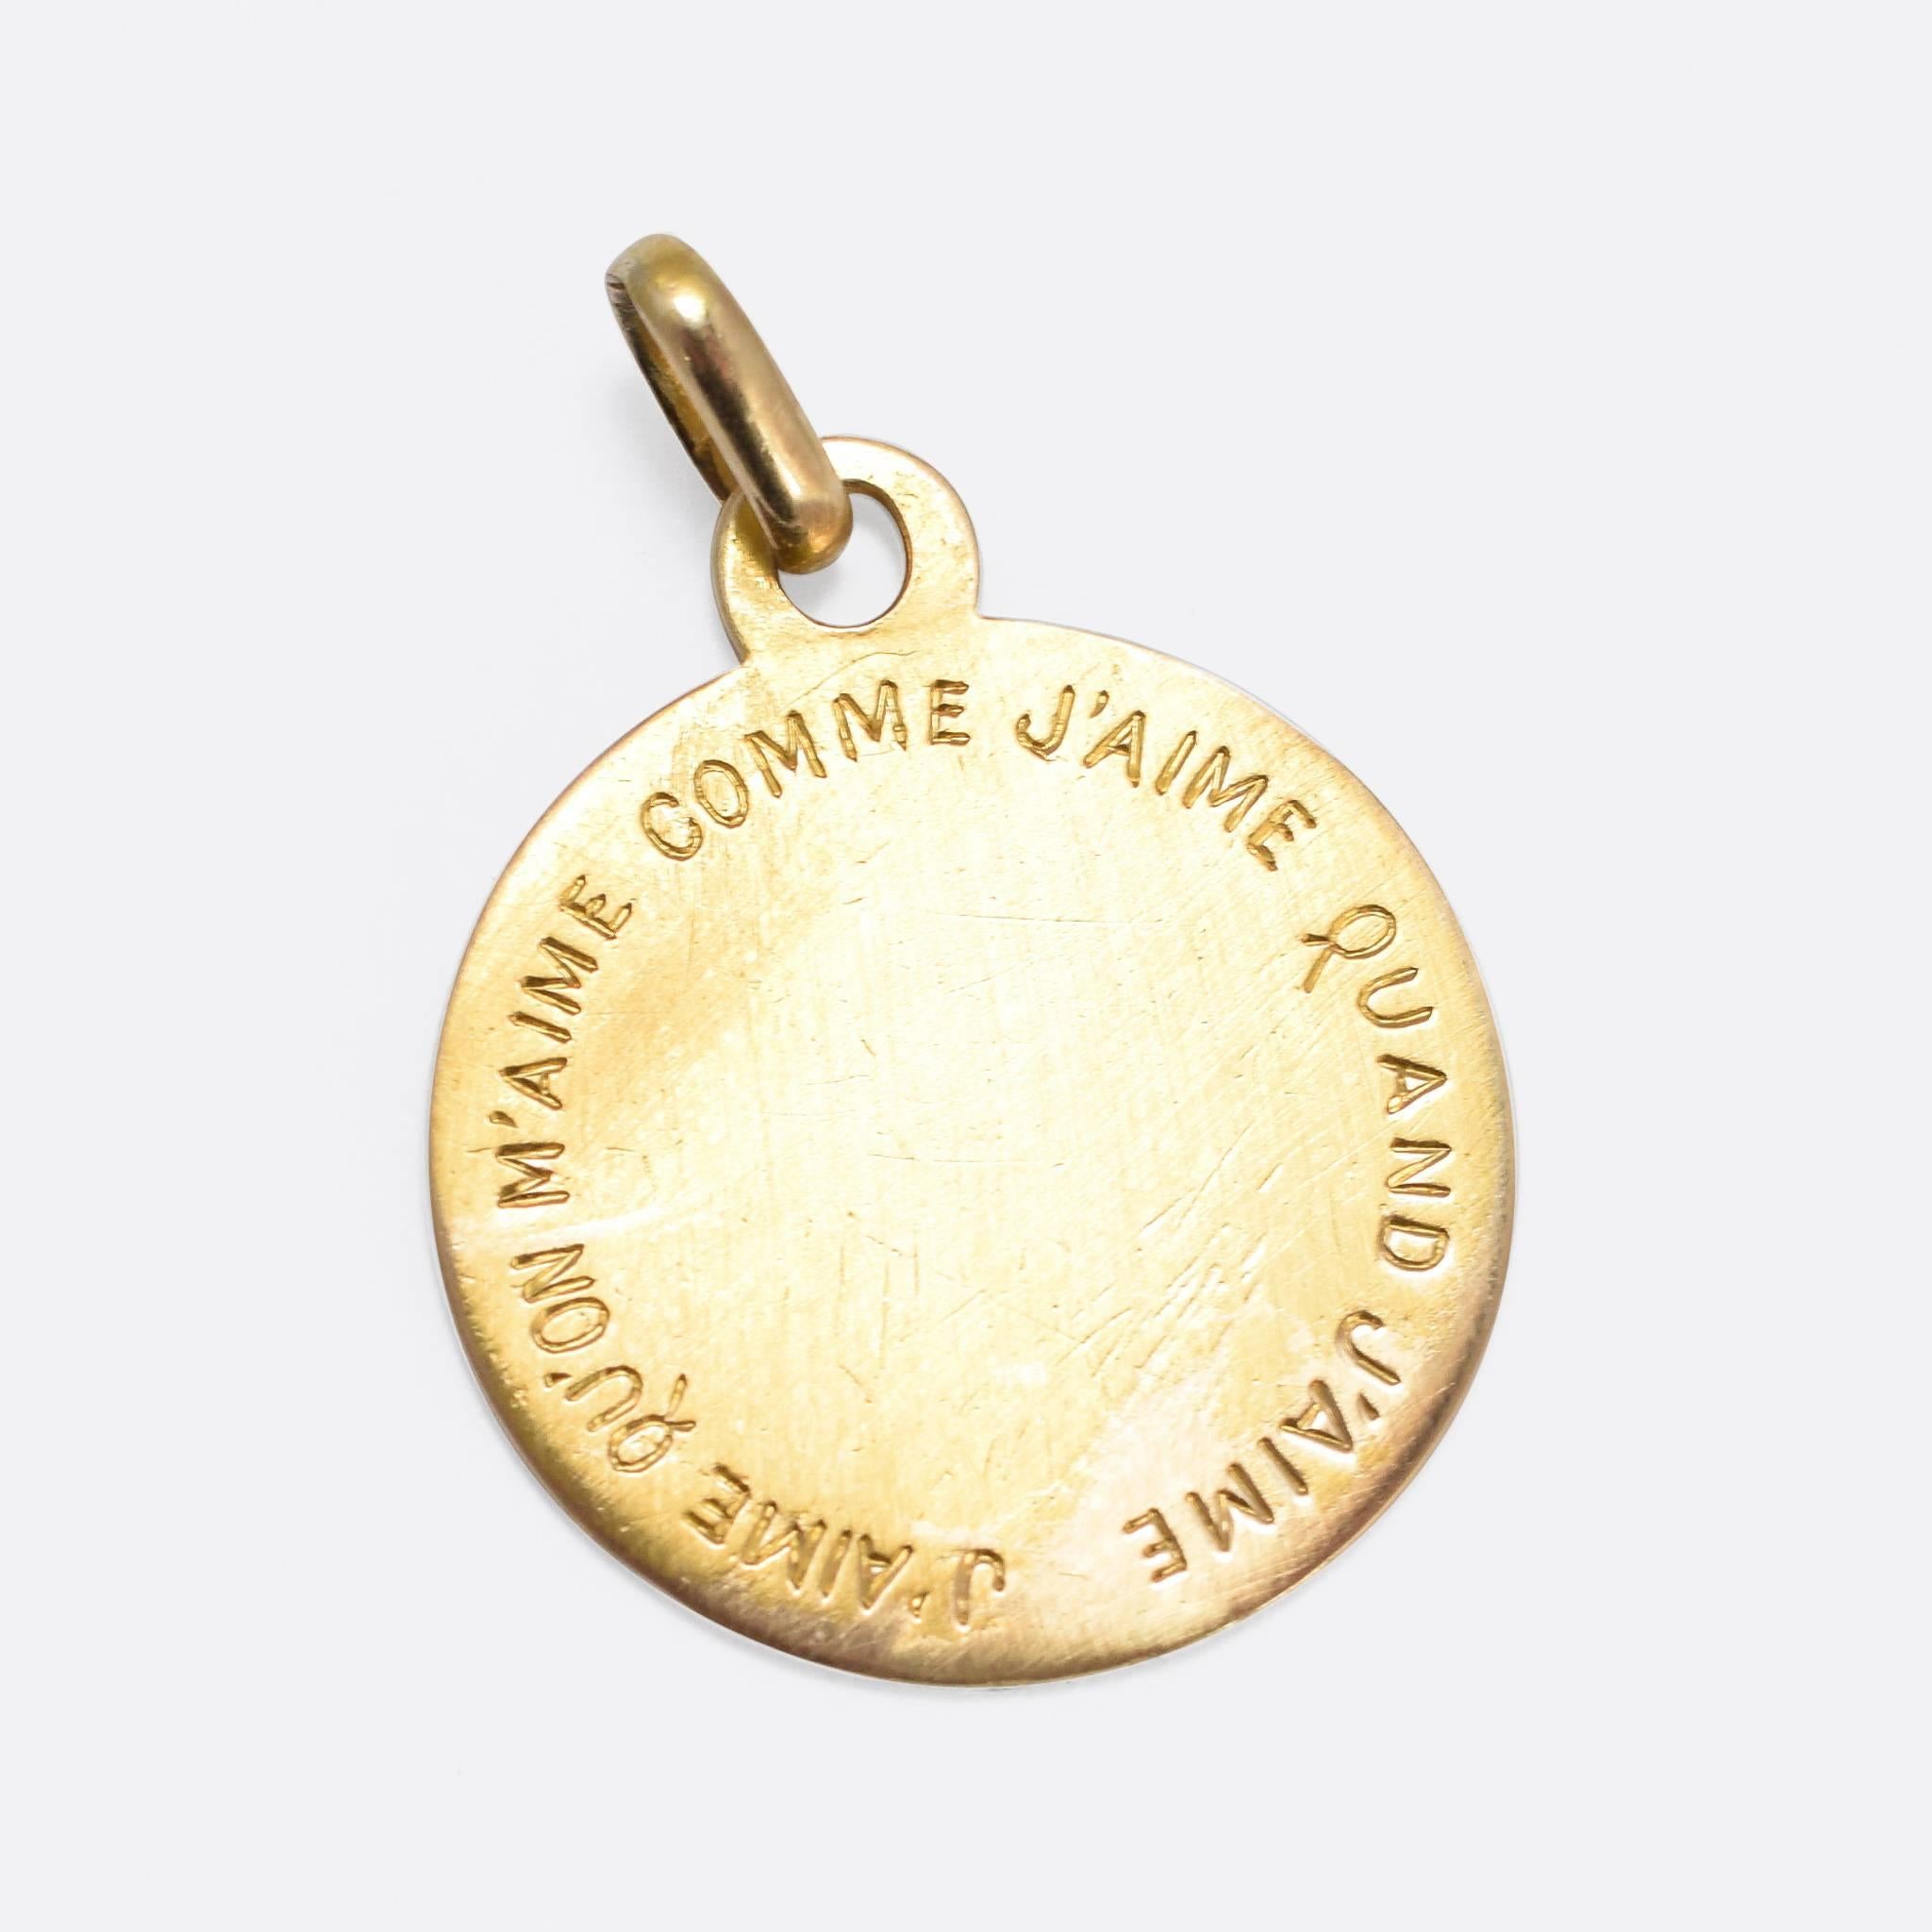 This sweet antique love token pendant is modelled in 18k yellow gold, with the romantic text: 